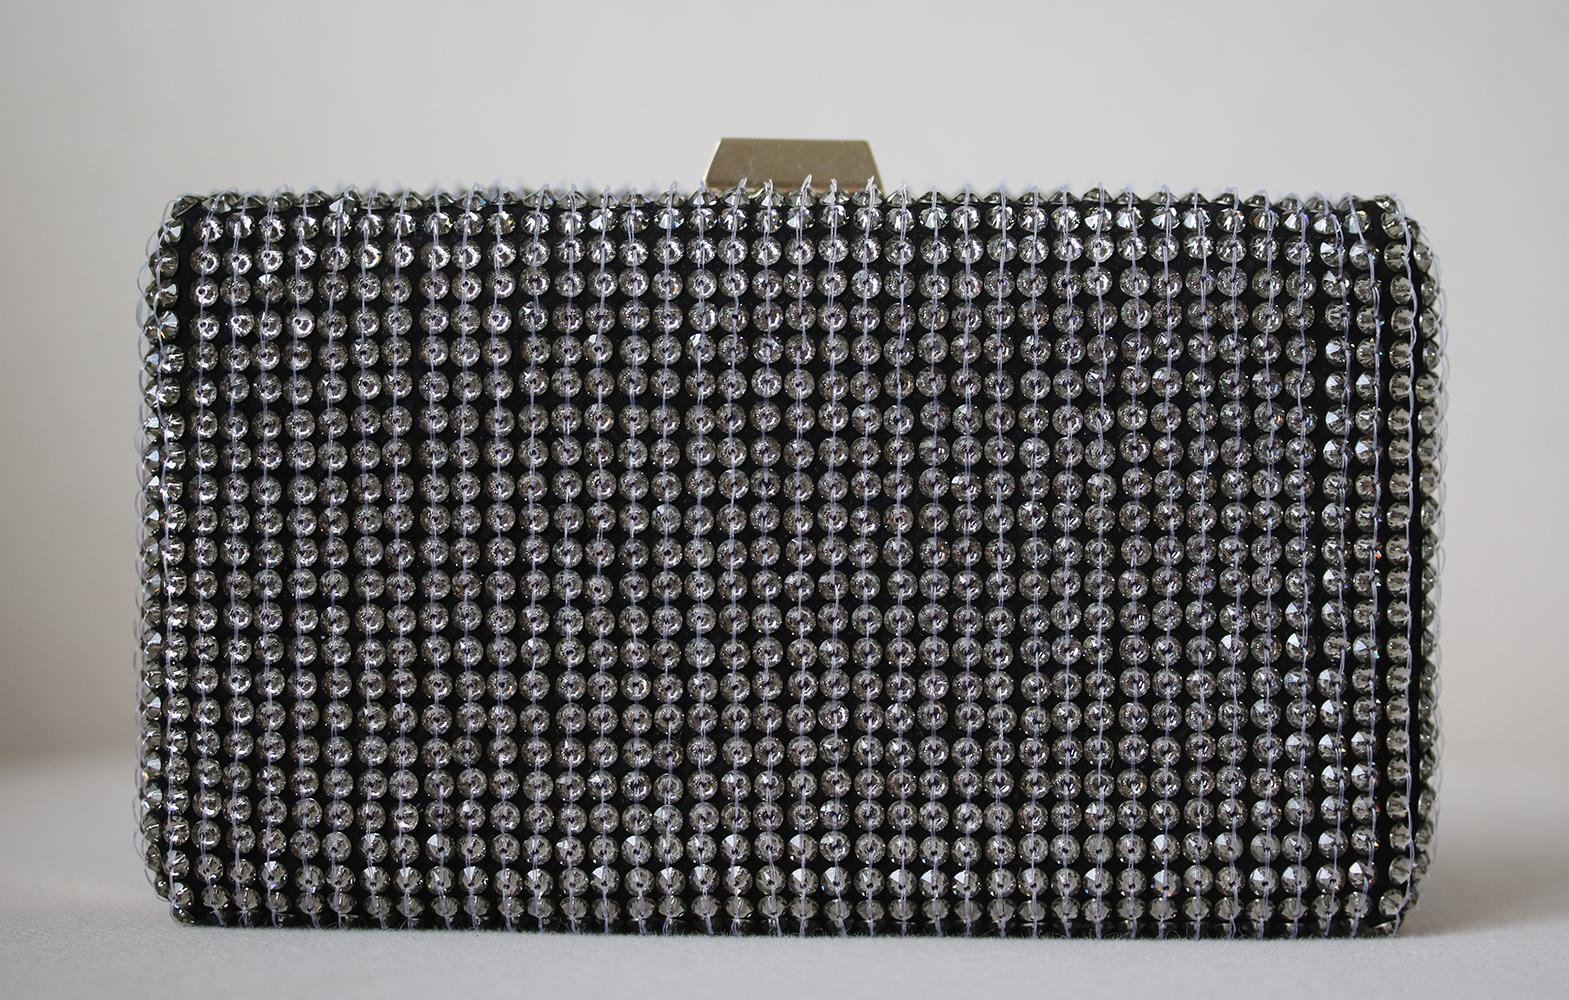 This beautiful Valentino Garavani Leather Crystal Clutch Bag features a sleek and sophisticated shape with black sparkling crystals throughout. This clutch as it comes with detachable strap. You will love that his bag is edgy yet still undeniable